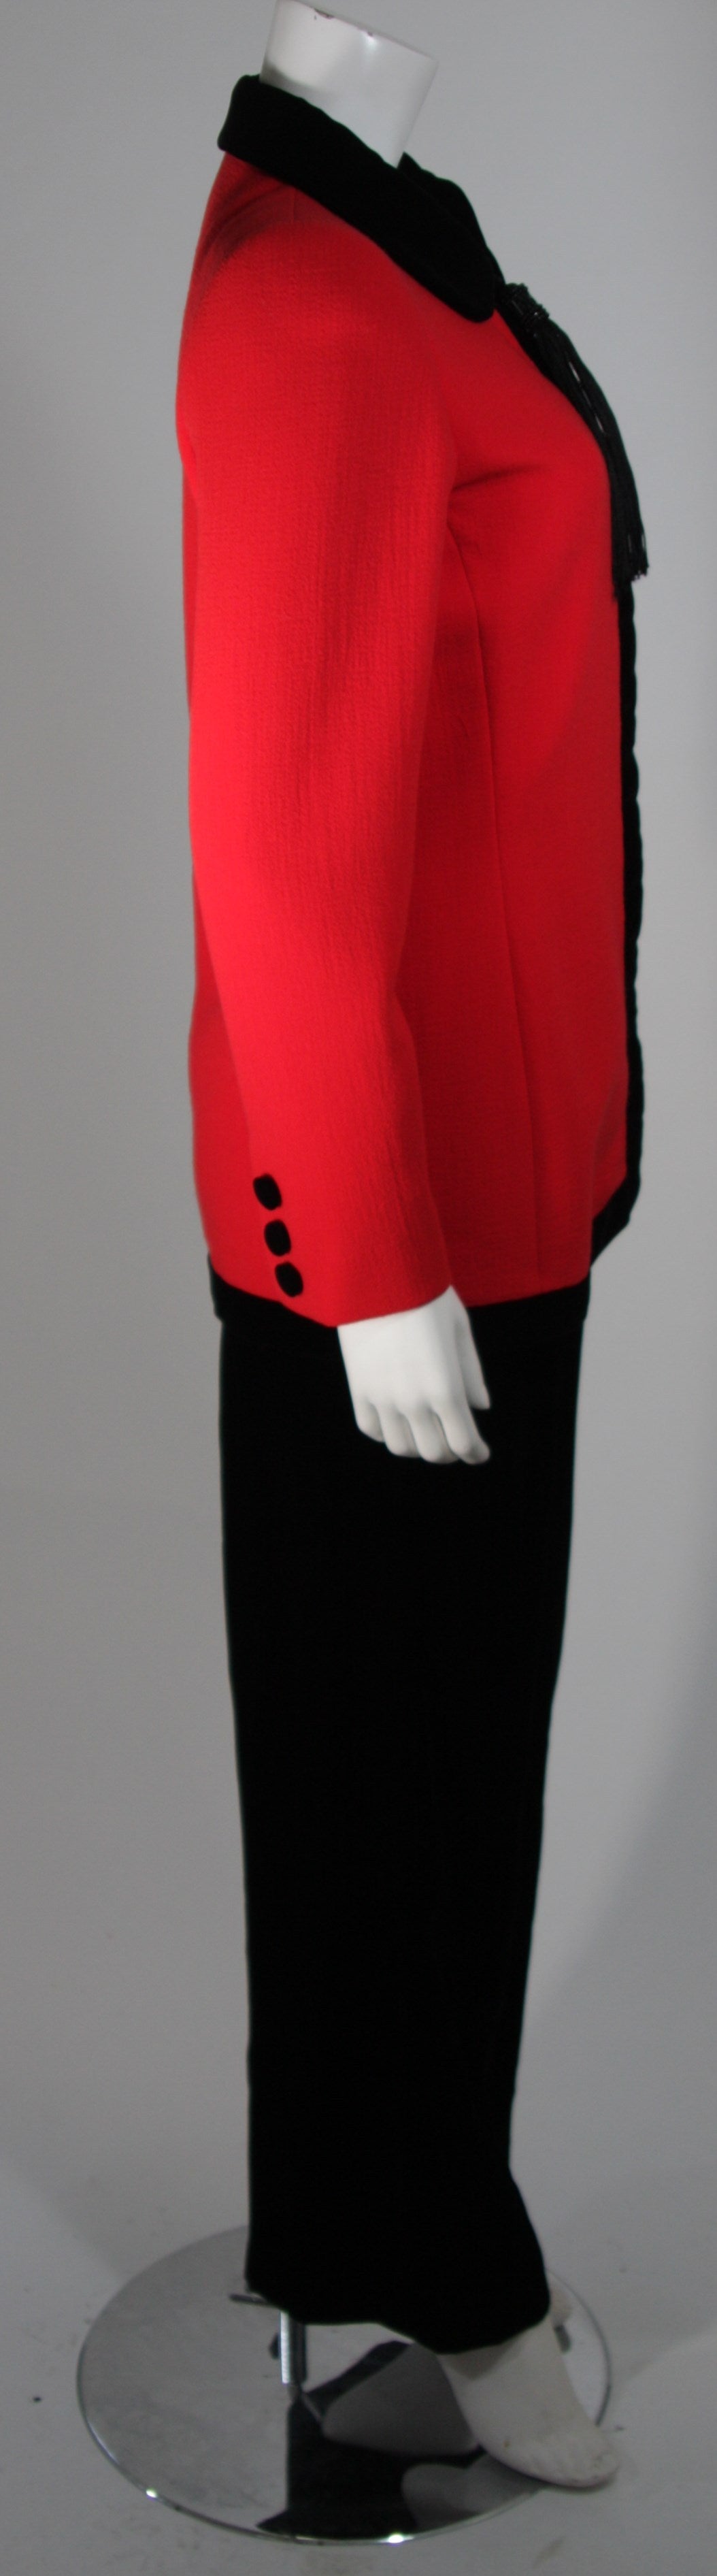 Carolina Herrera Red Wool and Velvet Evening Pant Suit Size Small 4 1